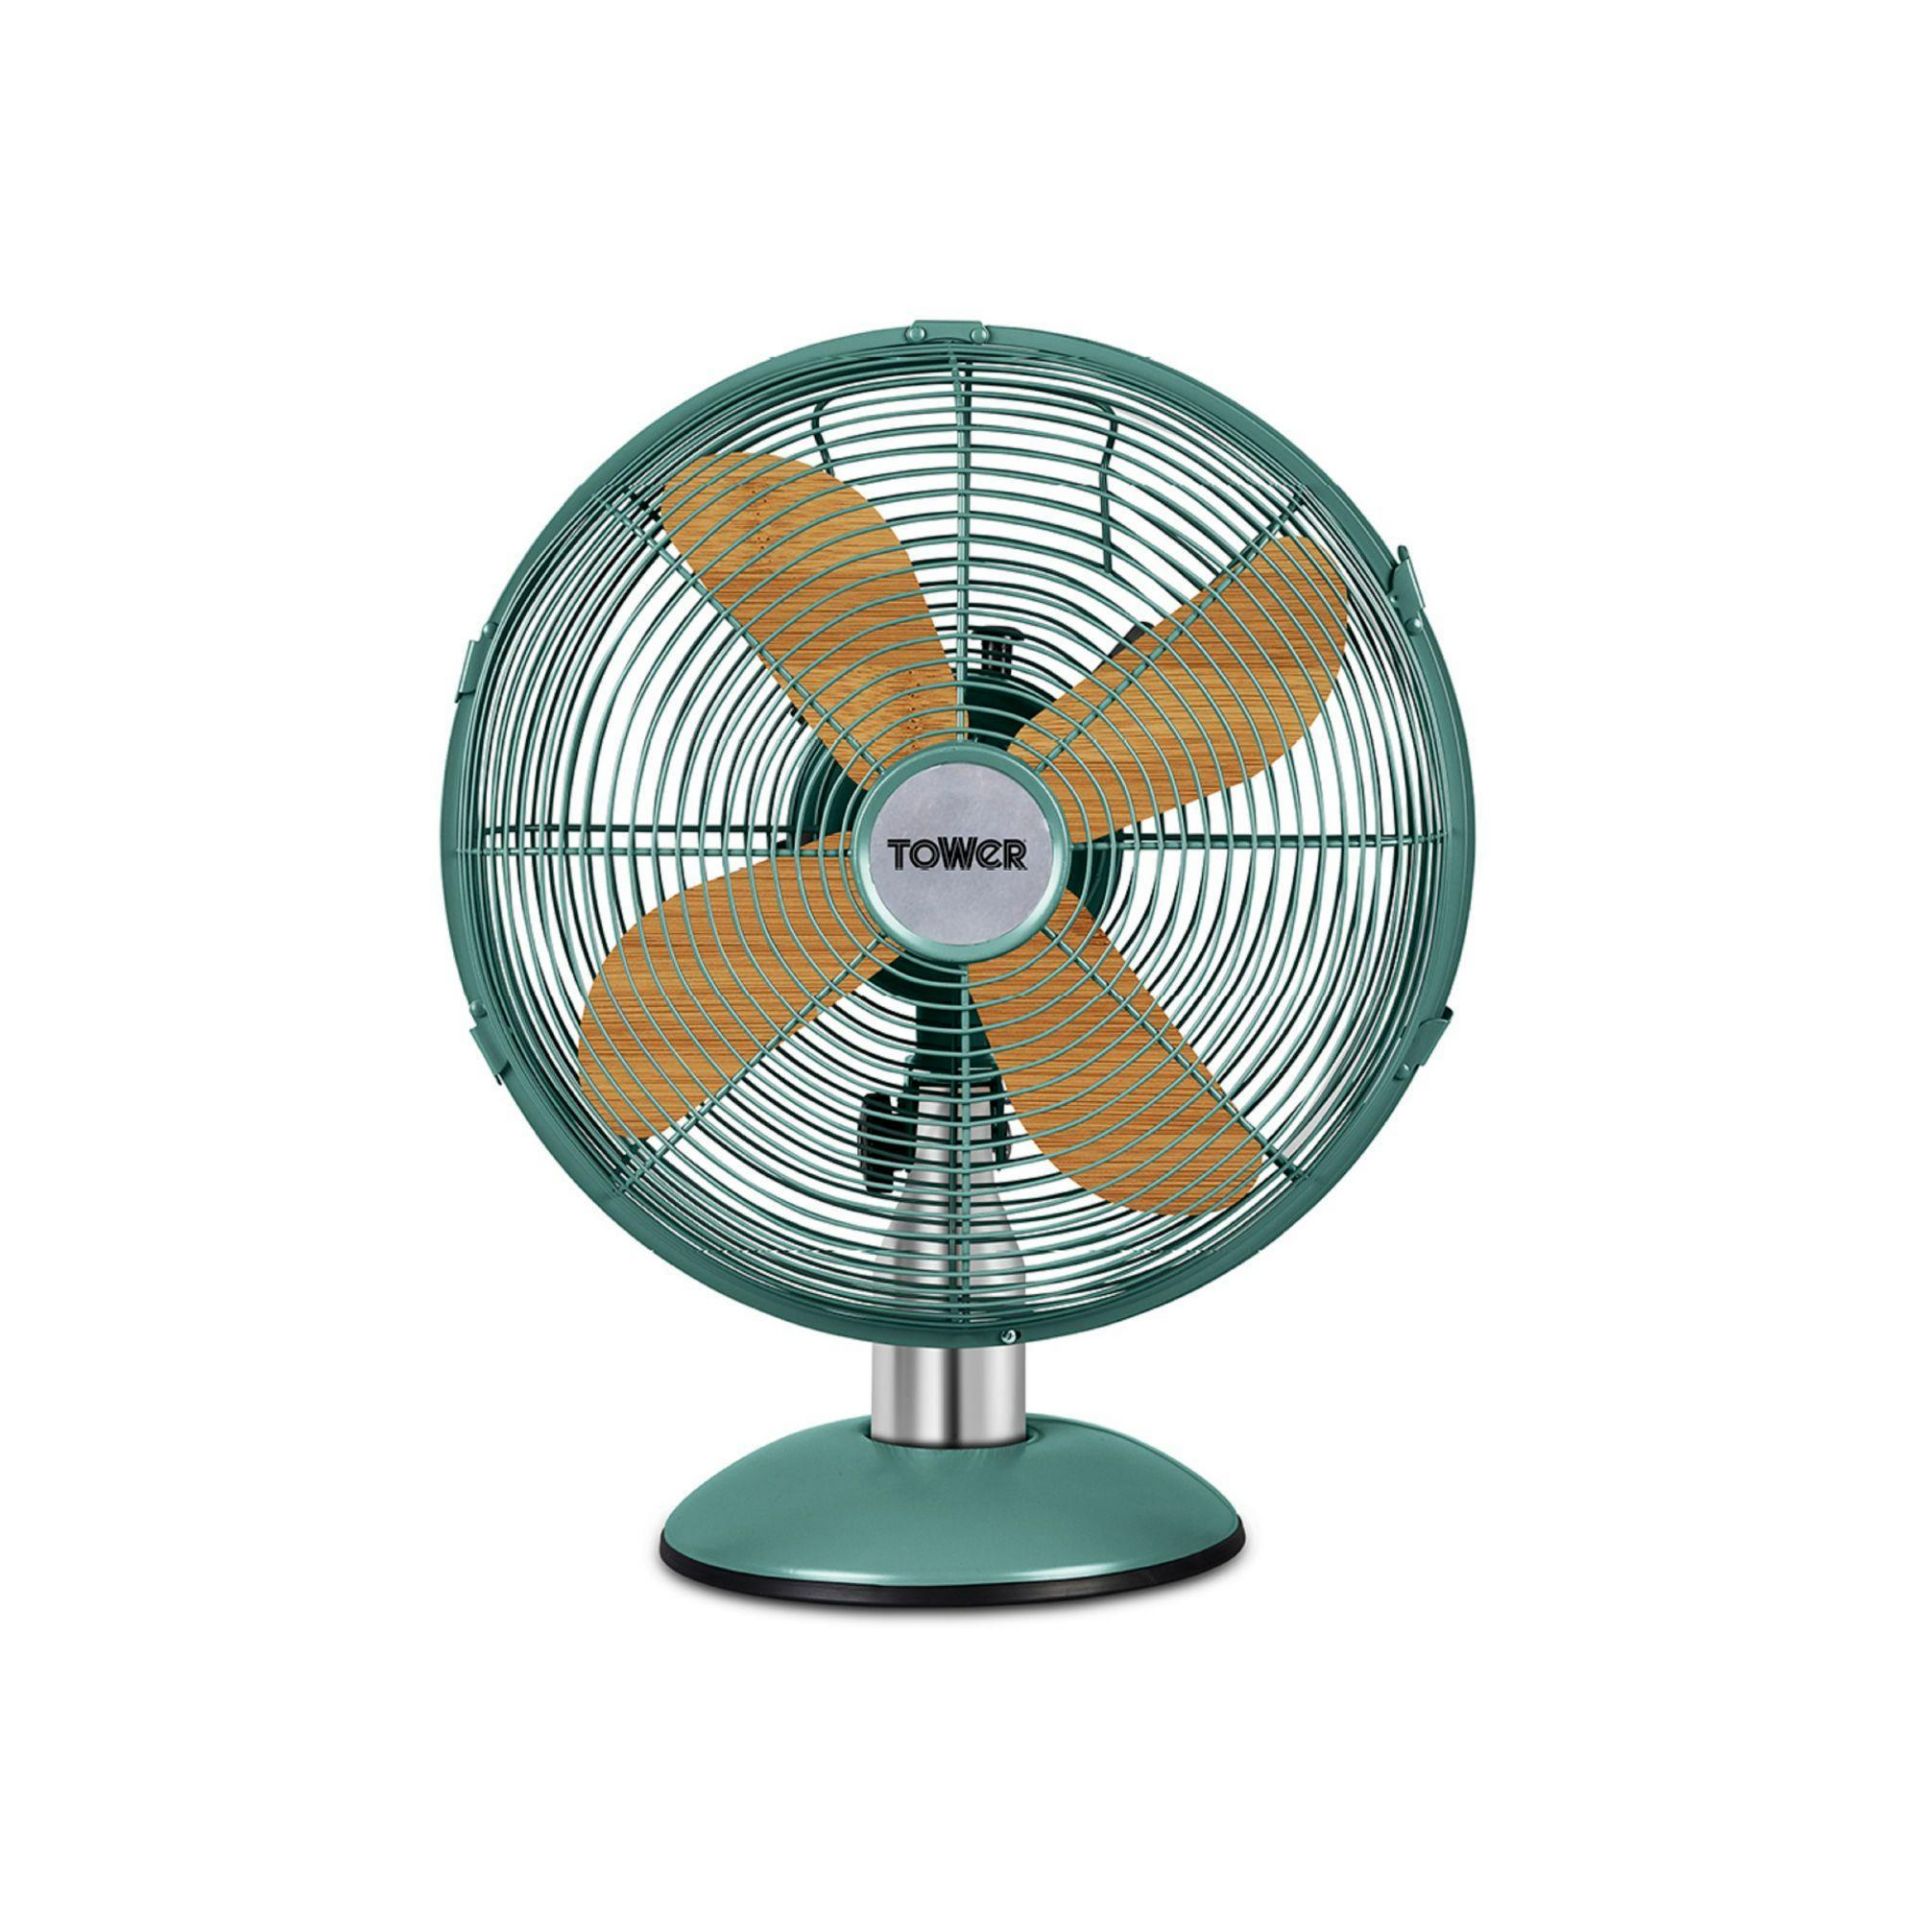 Tower Jade 12" 35W Table Fan - SR5/29. Beat the summer heat around your home or office with the